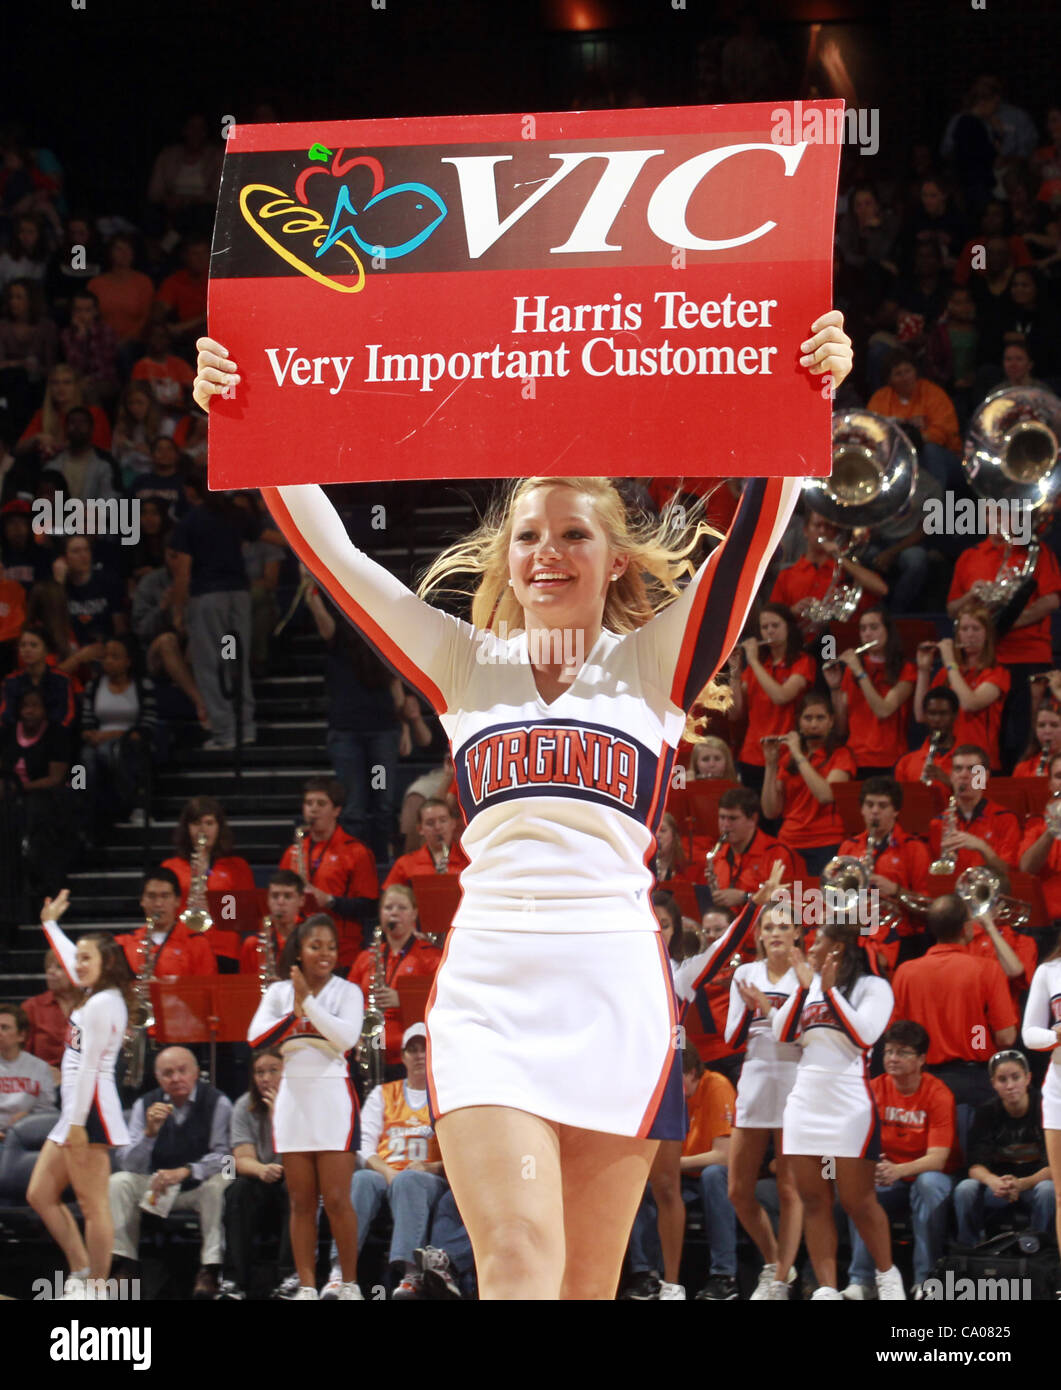 Nov. 20, 2011 - Charlottesville, Virginia, United States - Virginia Cavaliers cheerleaders hold up a Harris Teeter Vic card sign during the game on November 20, 2011 against the Tennessee Lady Volunteers at the John Paul Jones Arena in Charlottesville, Virginia. Virginia defeated Tennessee in overti Stock Photo